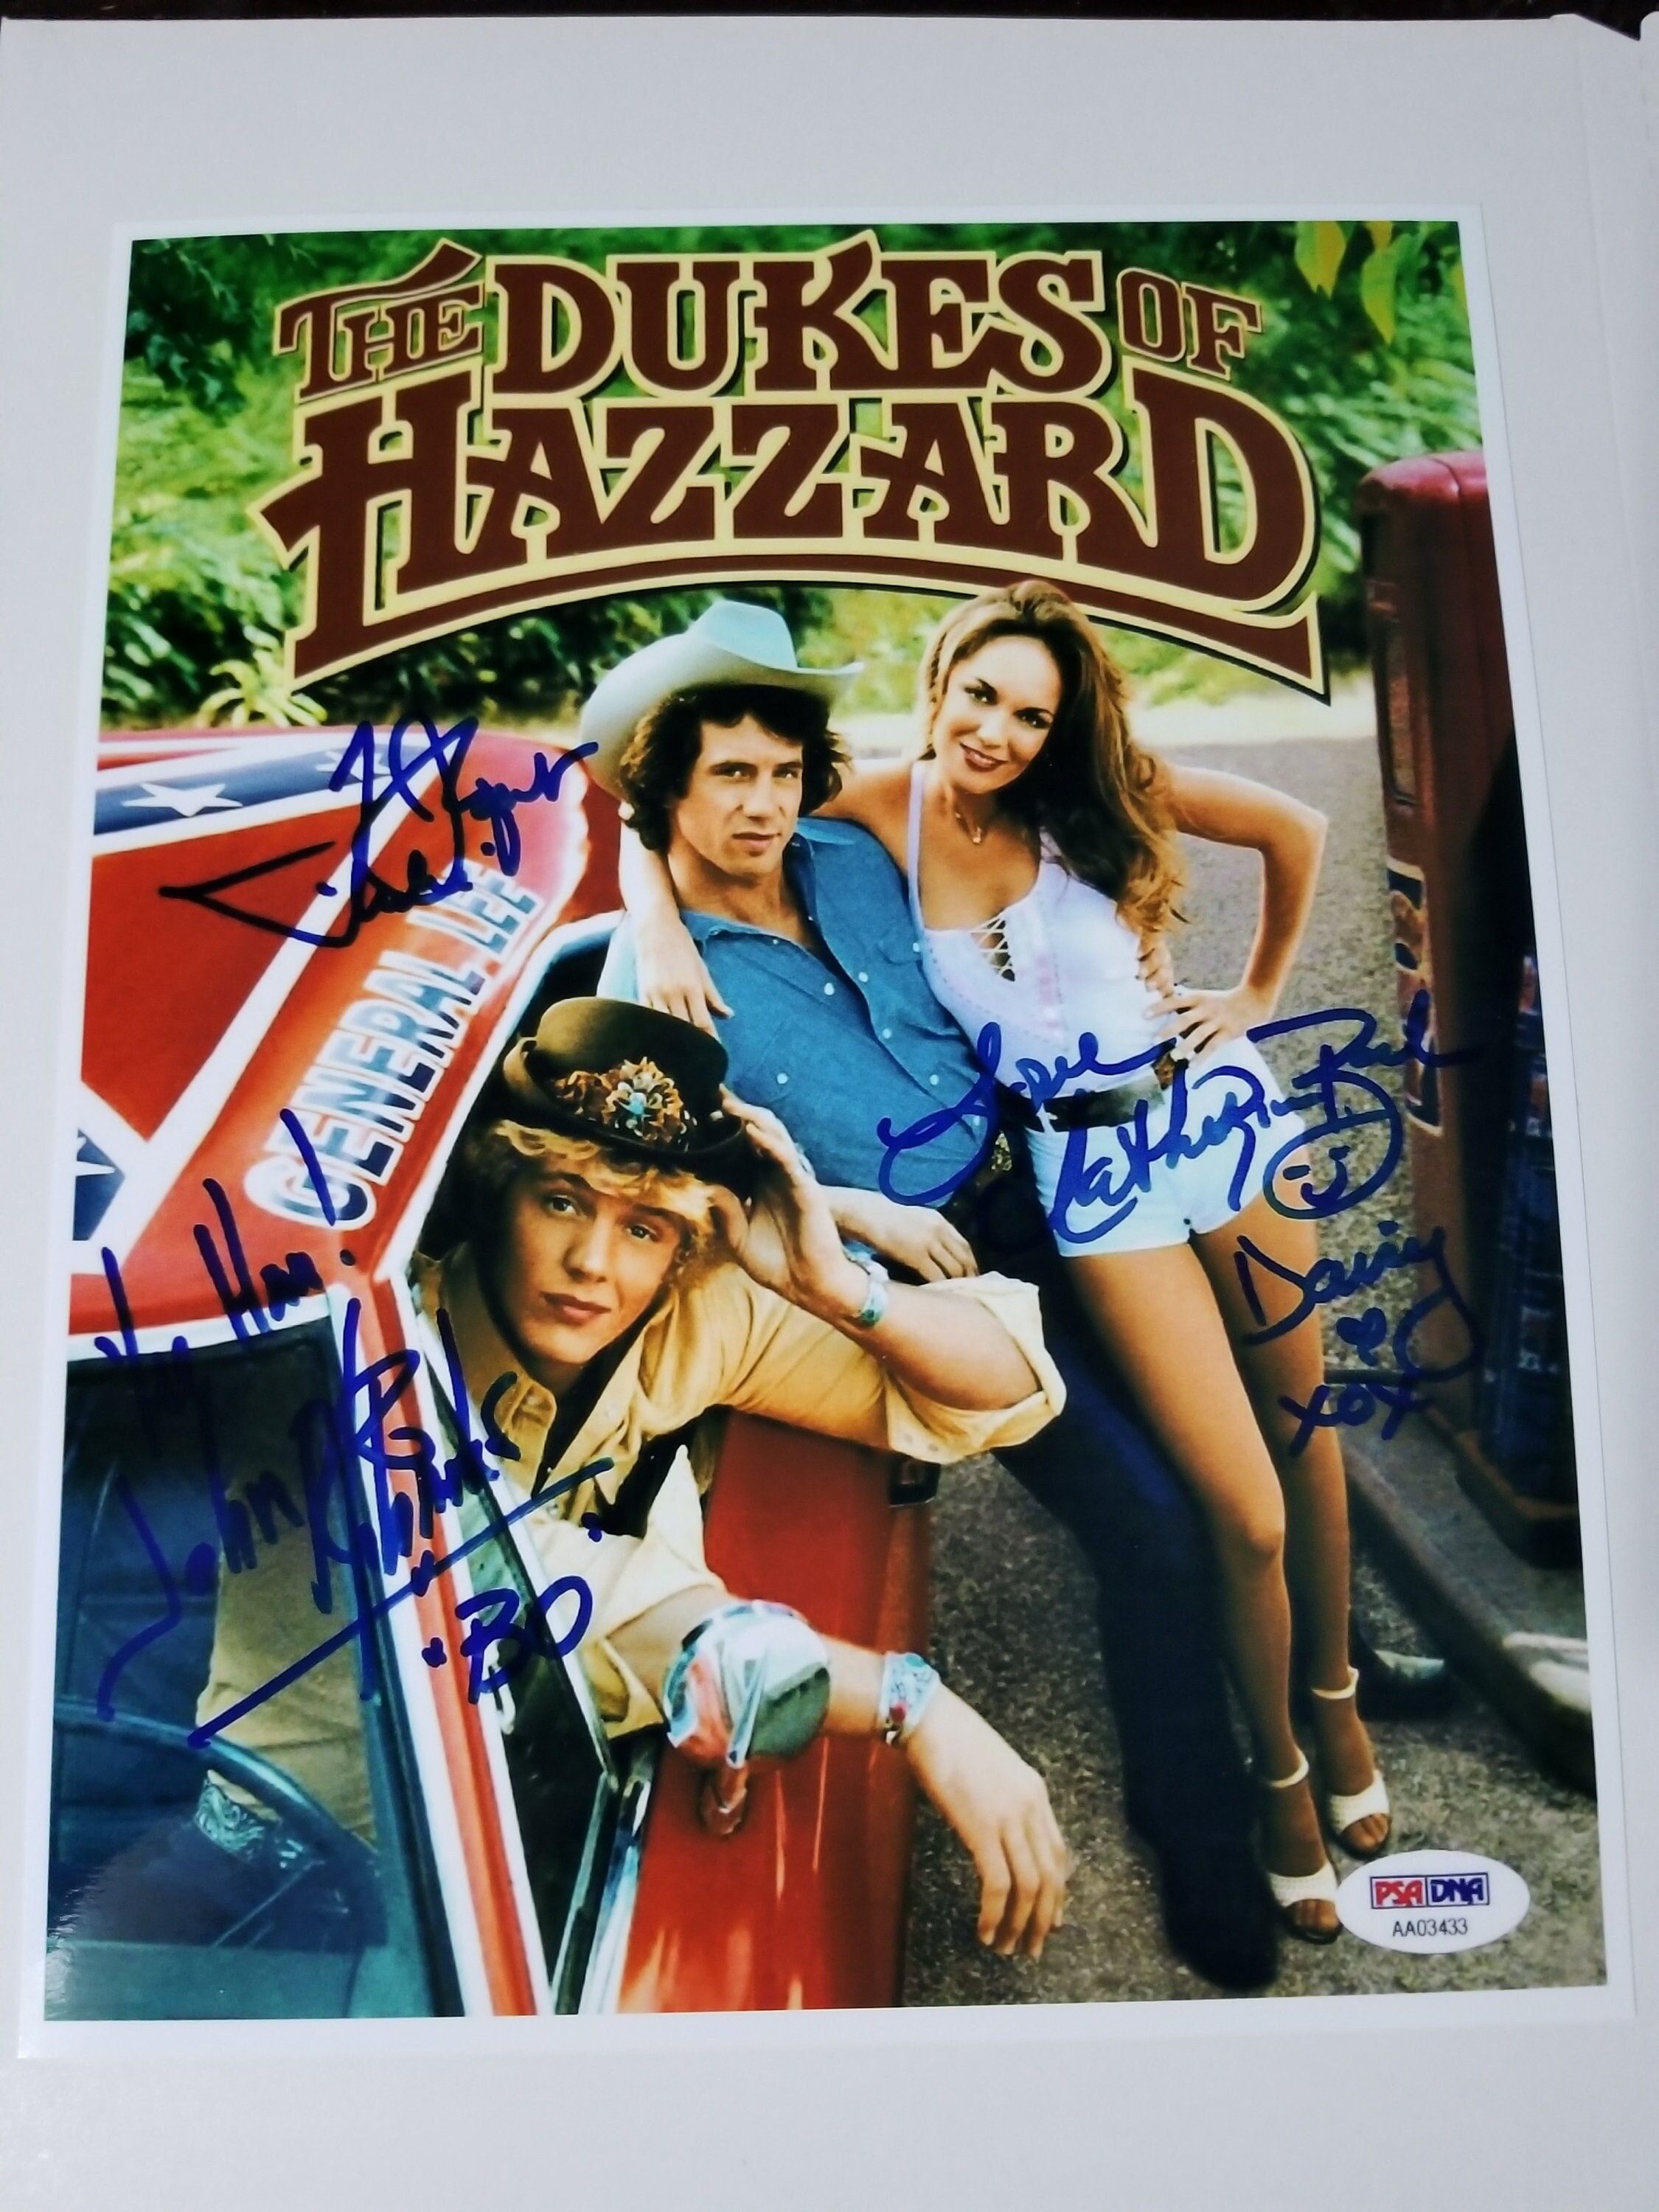 The Dukes of Hazzard Vintage Paper for Tumbler-png File for Sublimation 